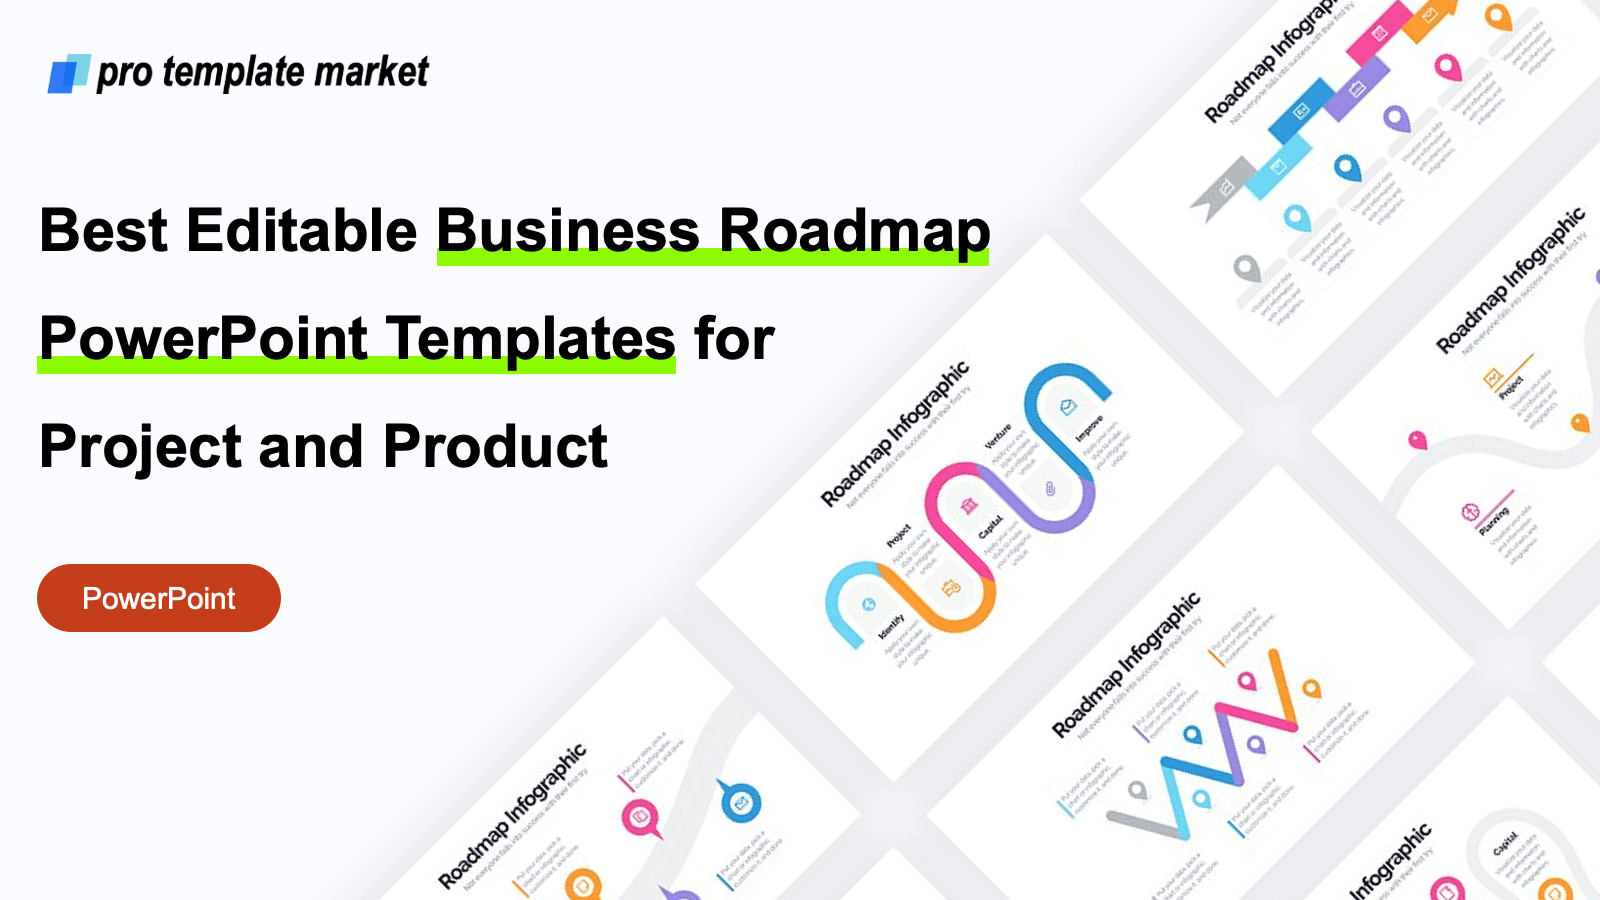 7 Best Editable Business Roadmap PowerPoint Templates for Project and Product in 2023